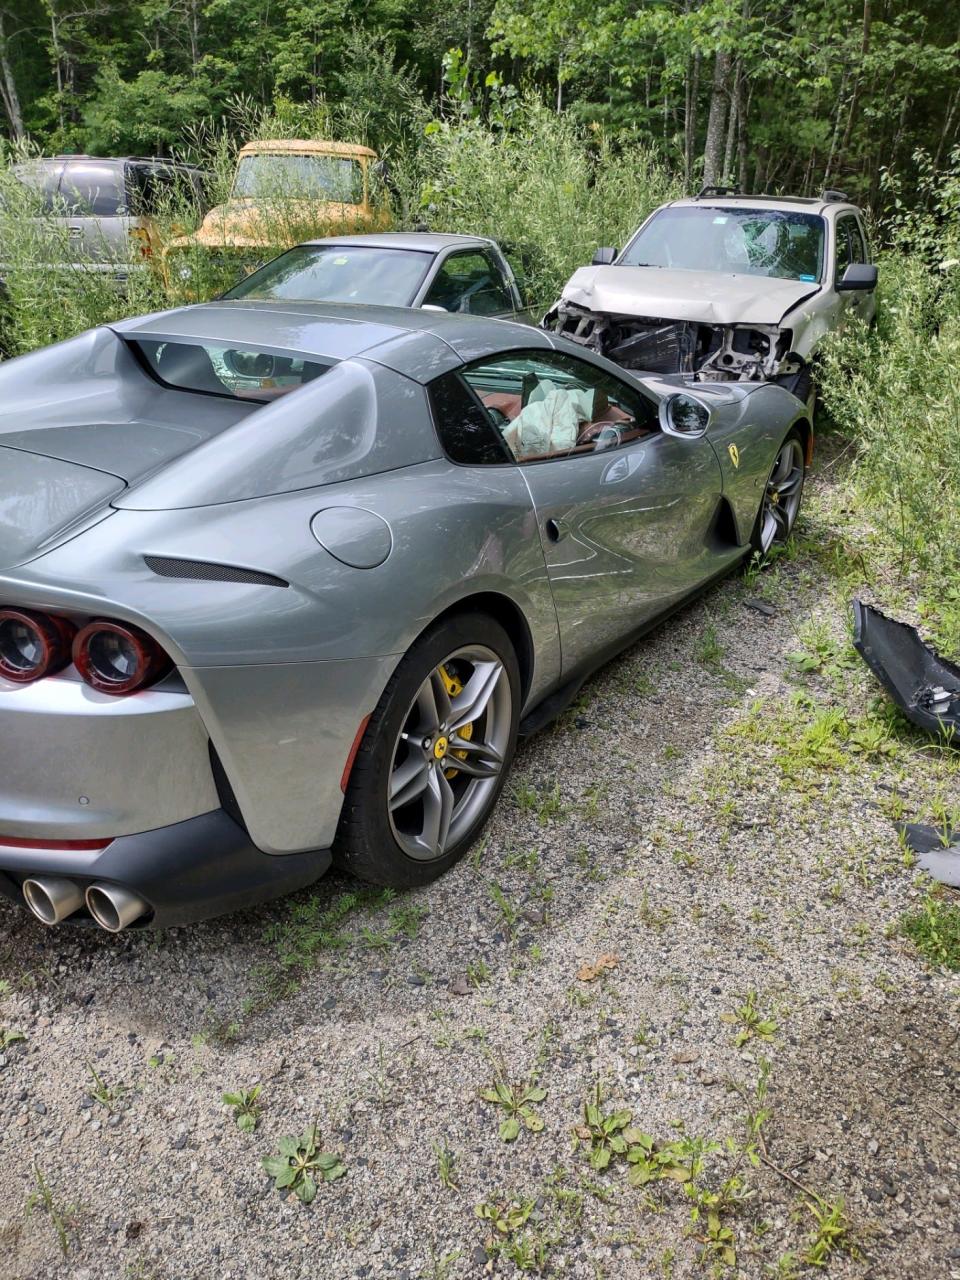 Police are investigating the theft of a 2021 Ferrari from the Cliff House in Cape Neddick valued at $700,000.